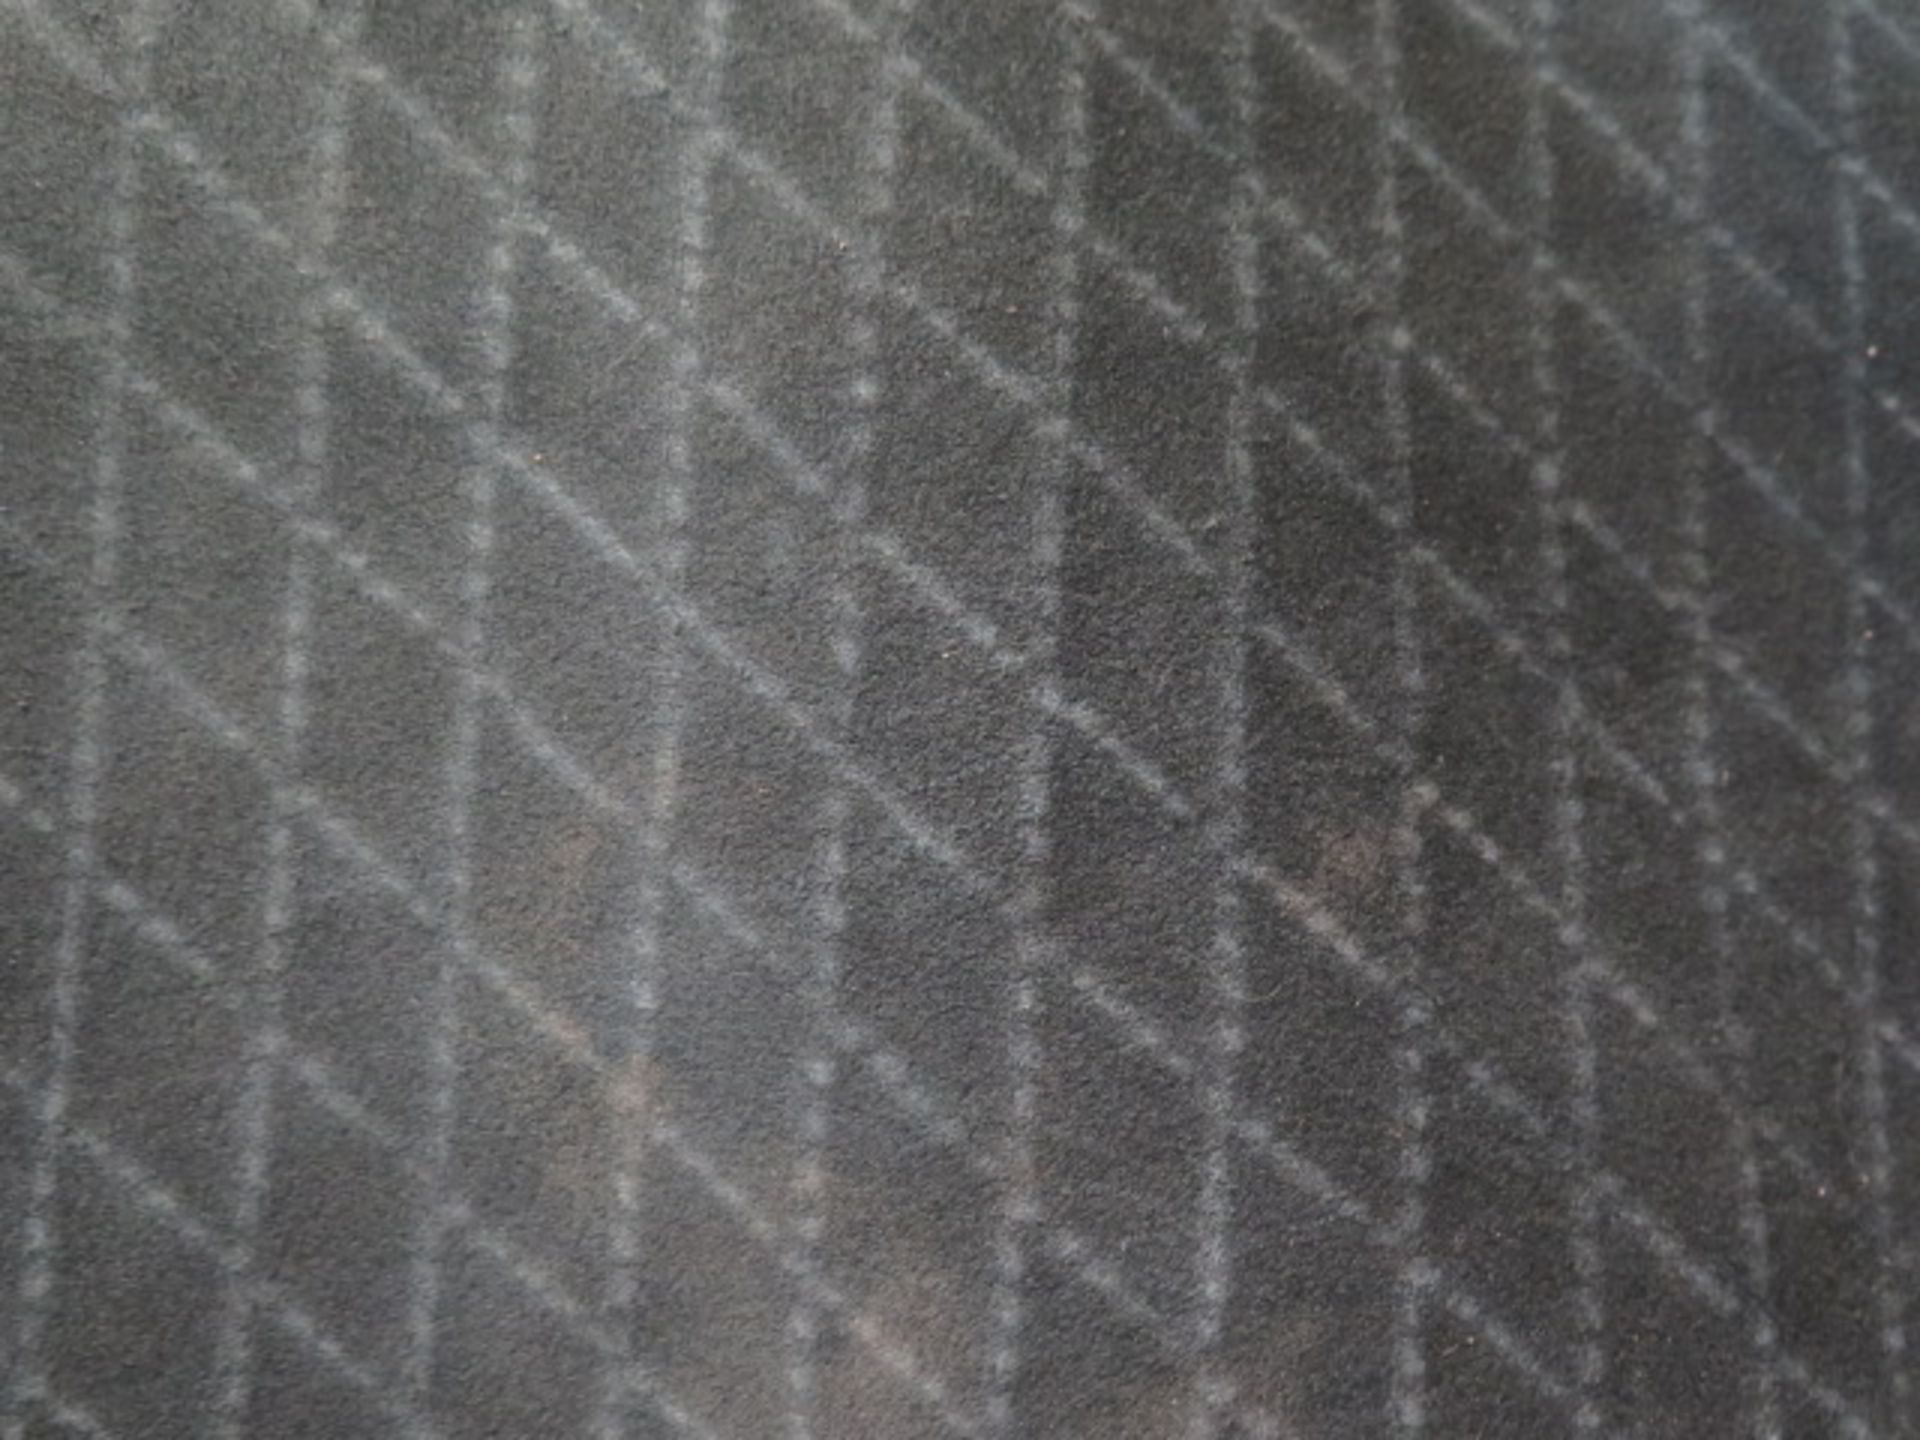 Leather Flouter Grade, 1.4mm, Black, 1800 Sq/Ft, Hides and Sides w/ Cart (SOLD AS-IS - NO WARRANTY) - Image 8 of 10